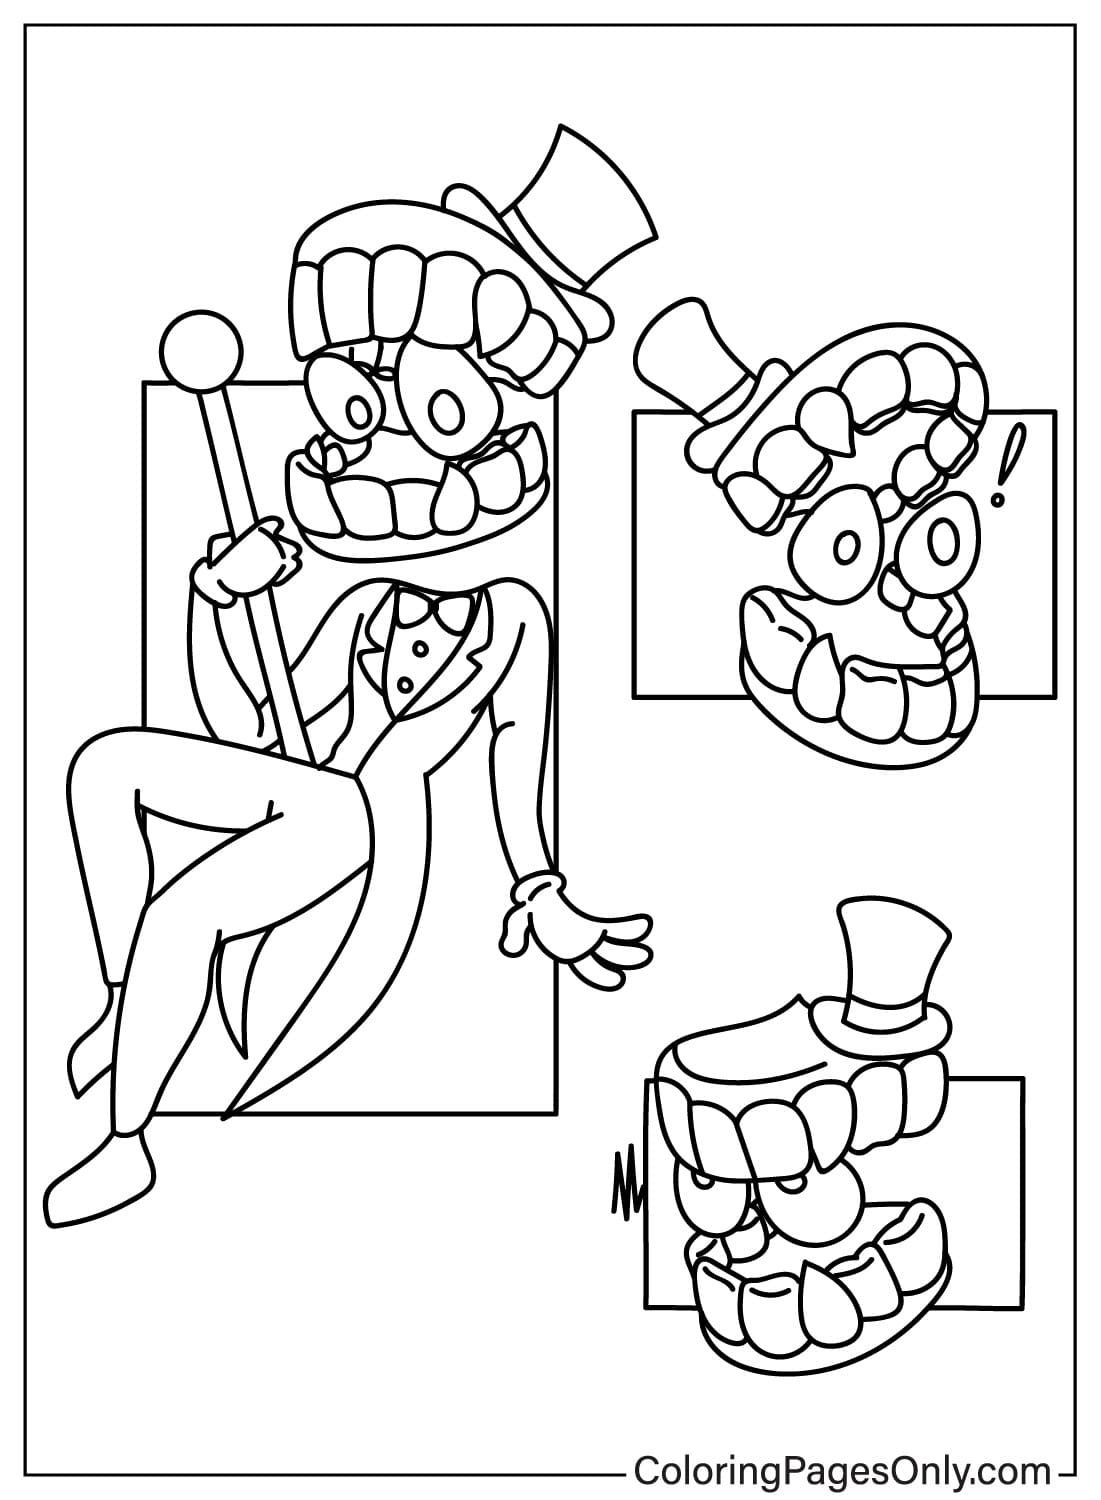 Caine Printable Coloring Page from Caine